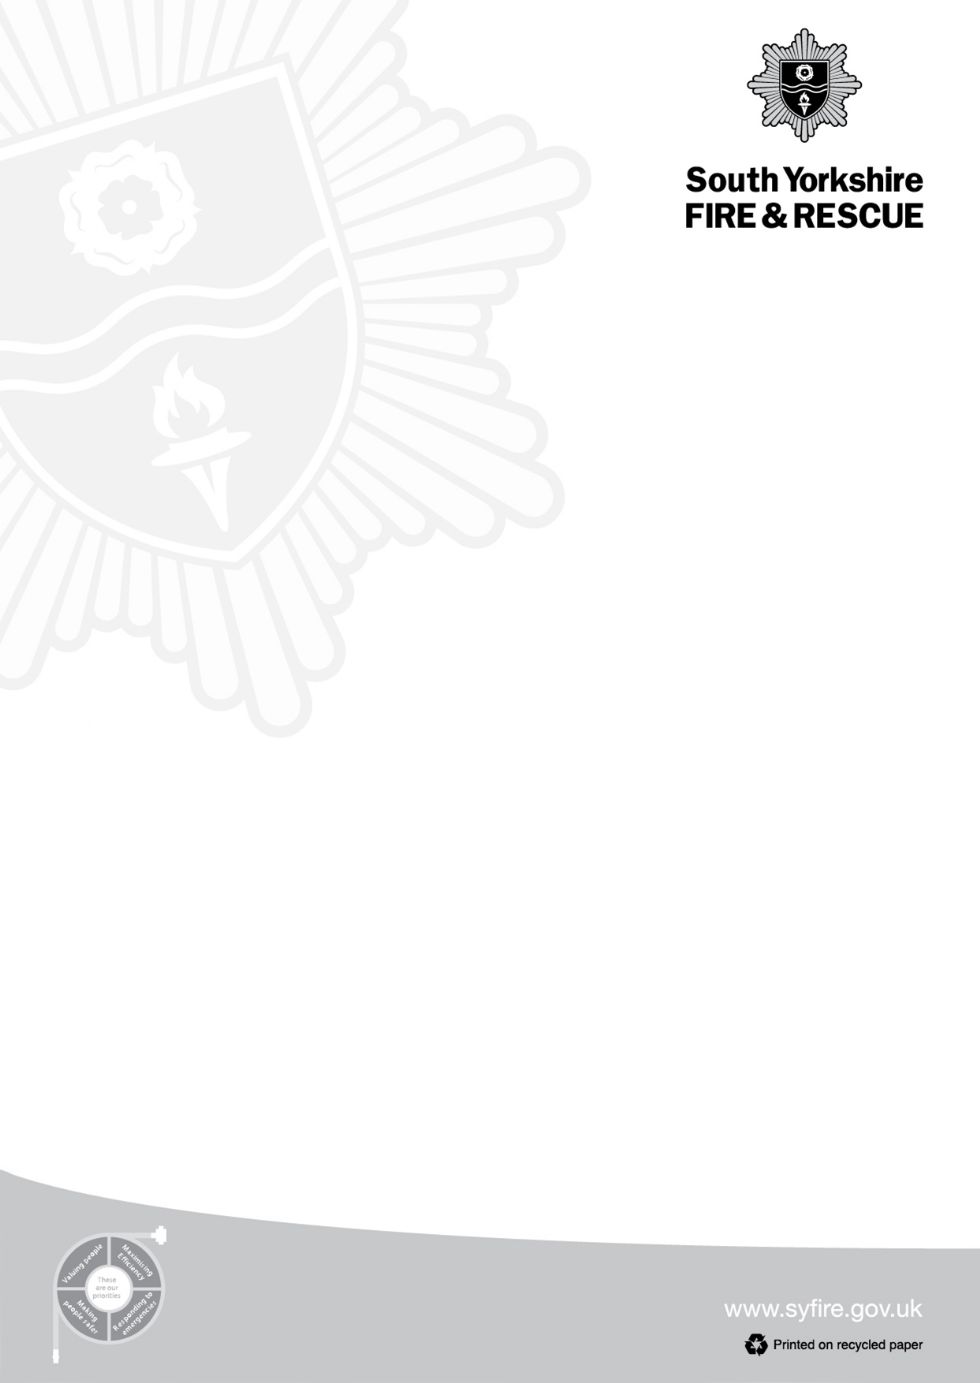 south yorkshire  fire and rescue logo